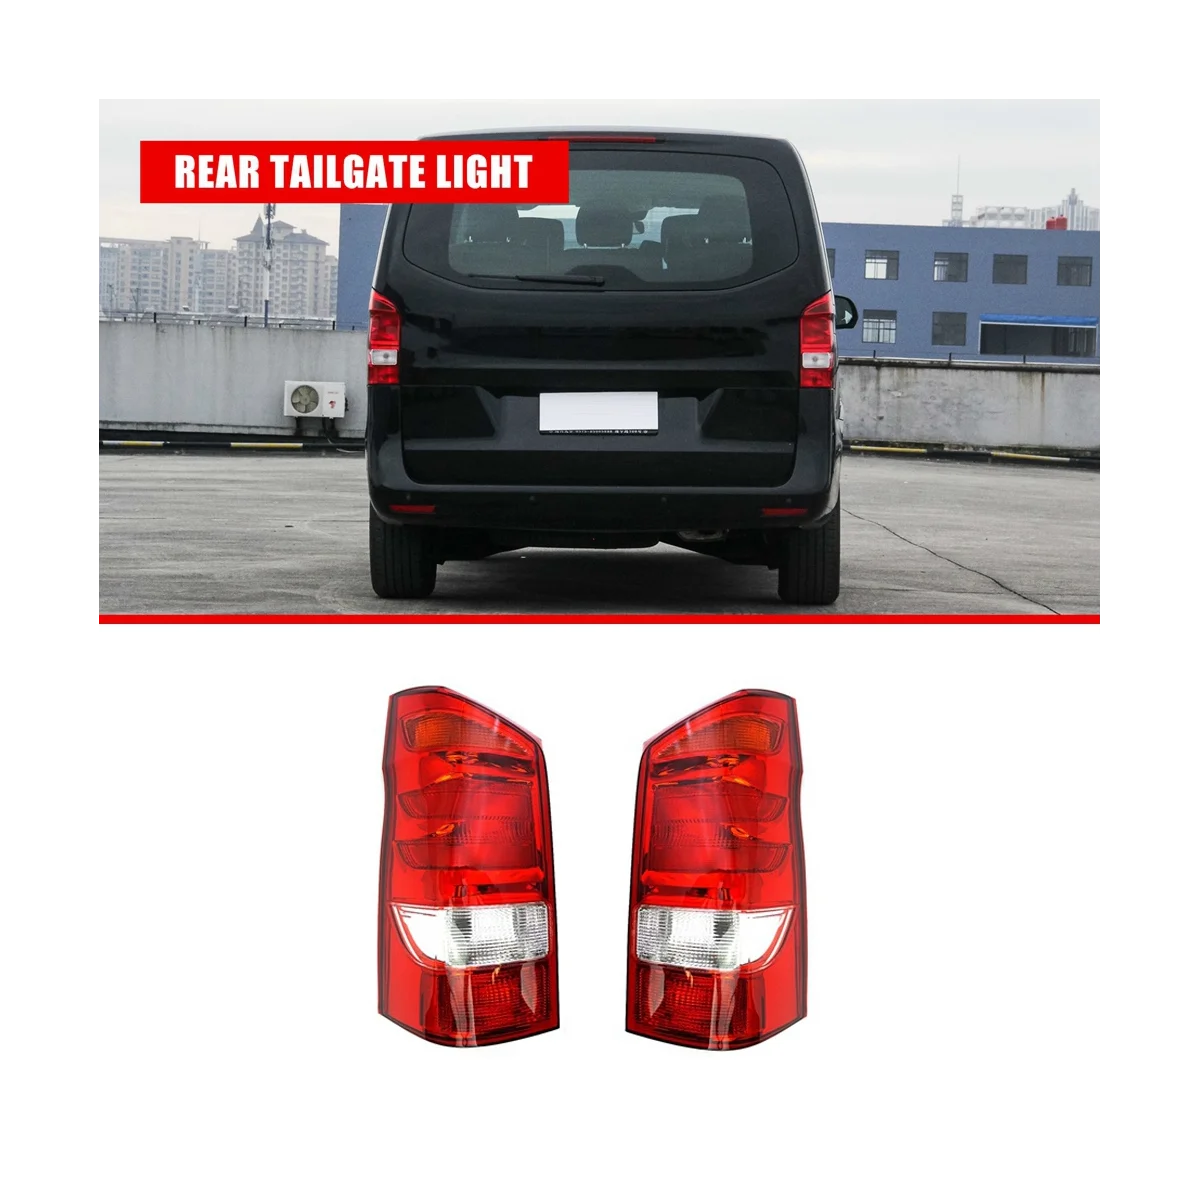 

Car Rear Tailgate Tail Light Lamp for Mercedes Benz VITO W447 2015+ Right